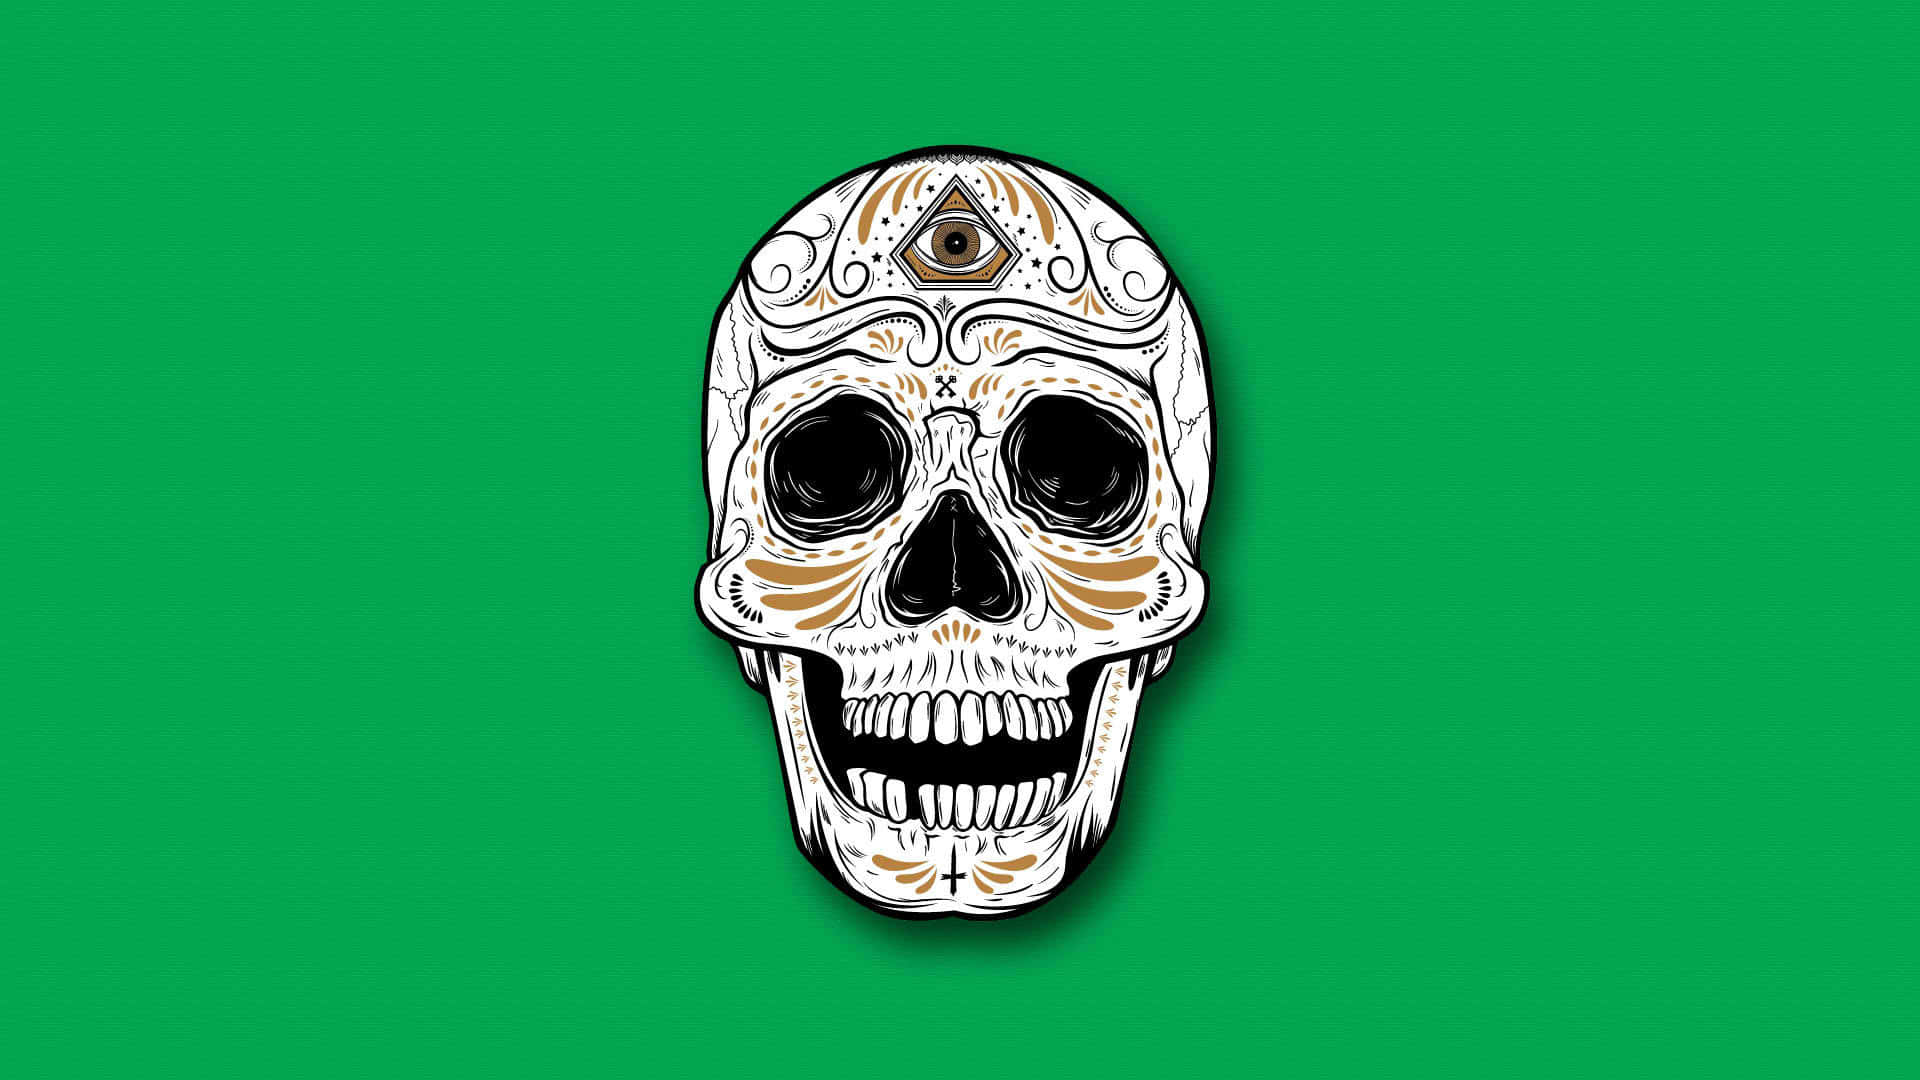 "Capture the brilliantly bold sugar skull styling of this unique phone" Wallpaper